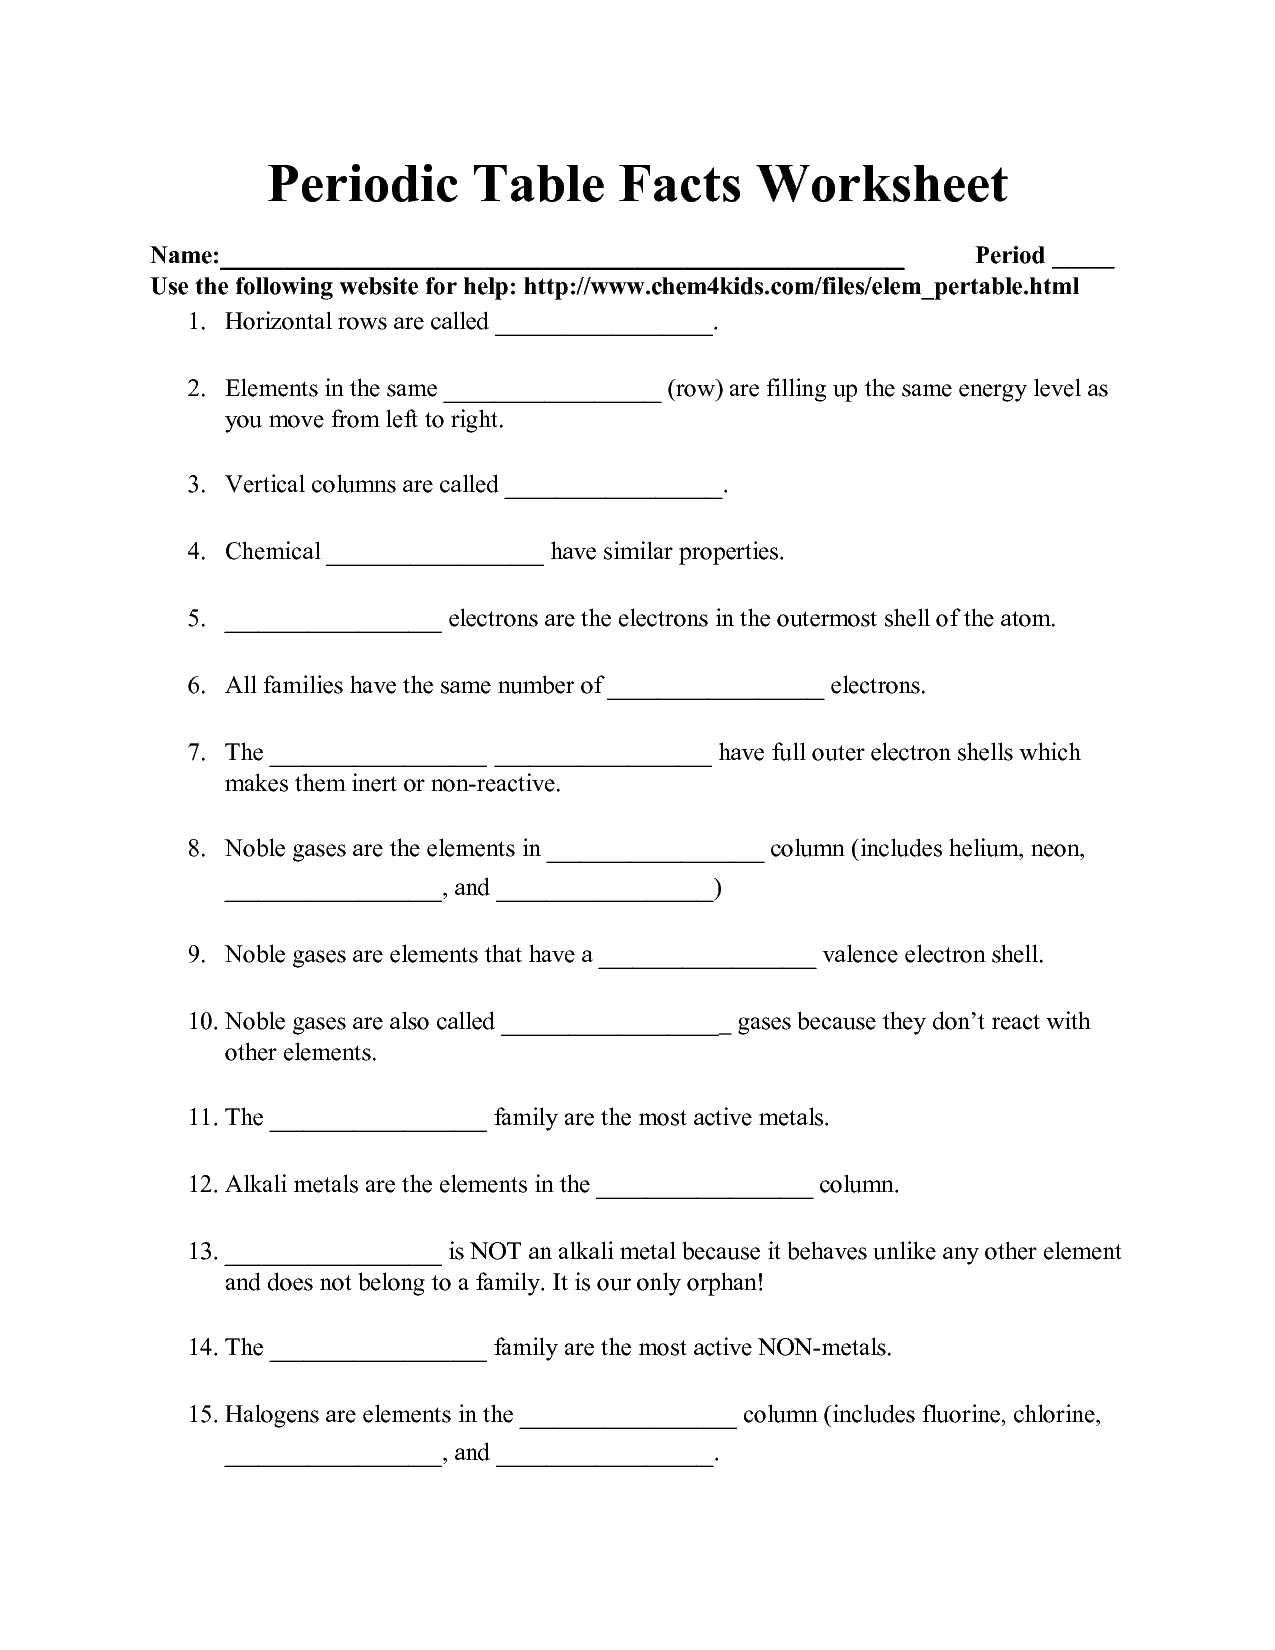 Gas Laws Practice Problems Worksheet Answers together with Collection Of Chemistry 6 3 Periodic Trends Worksheet Answers